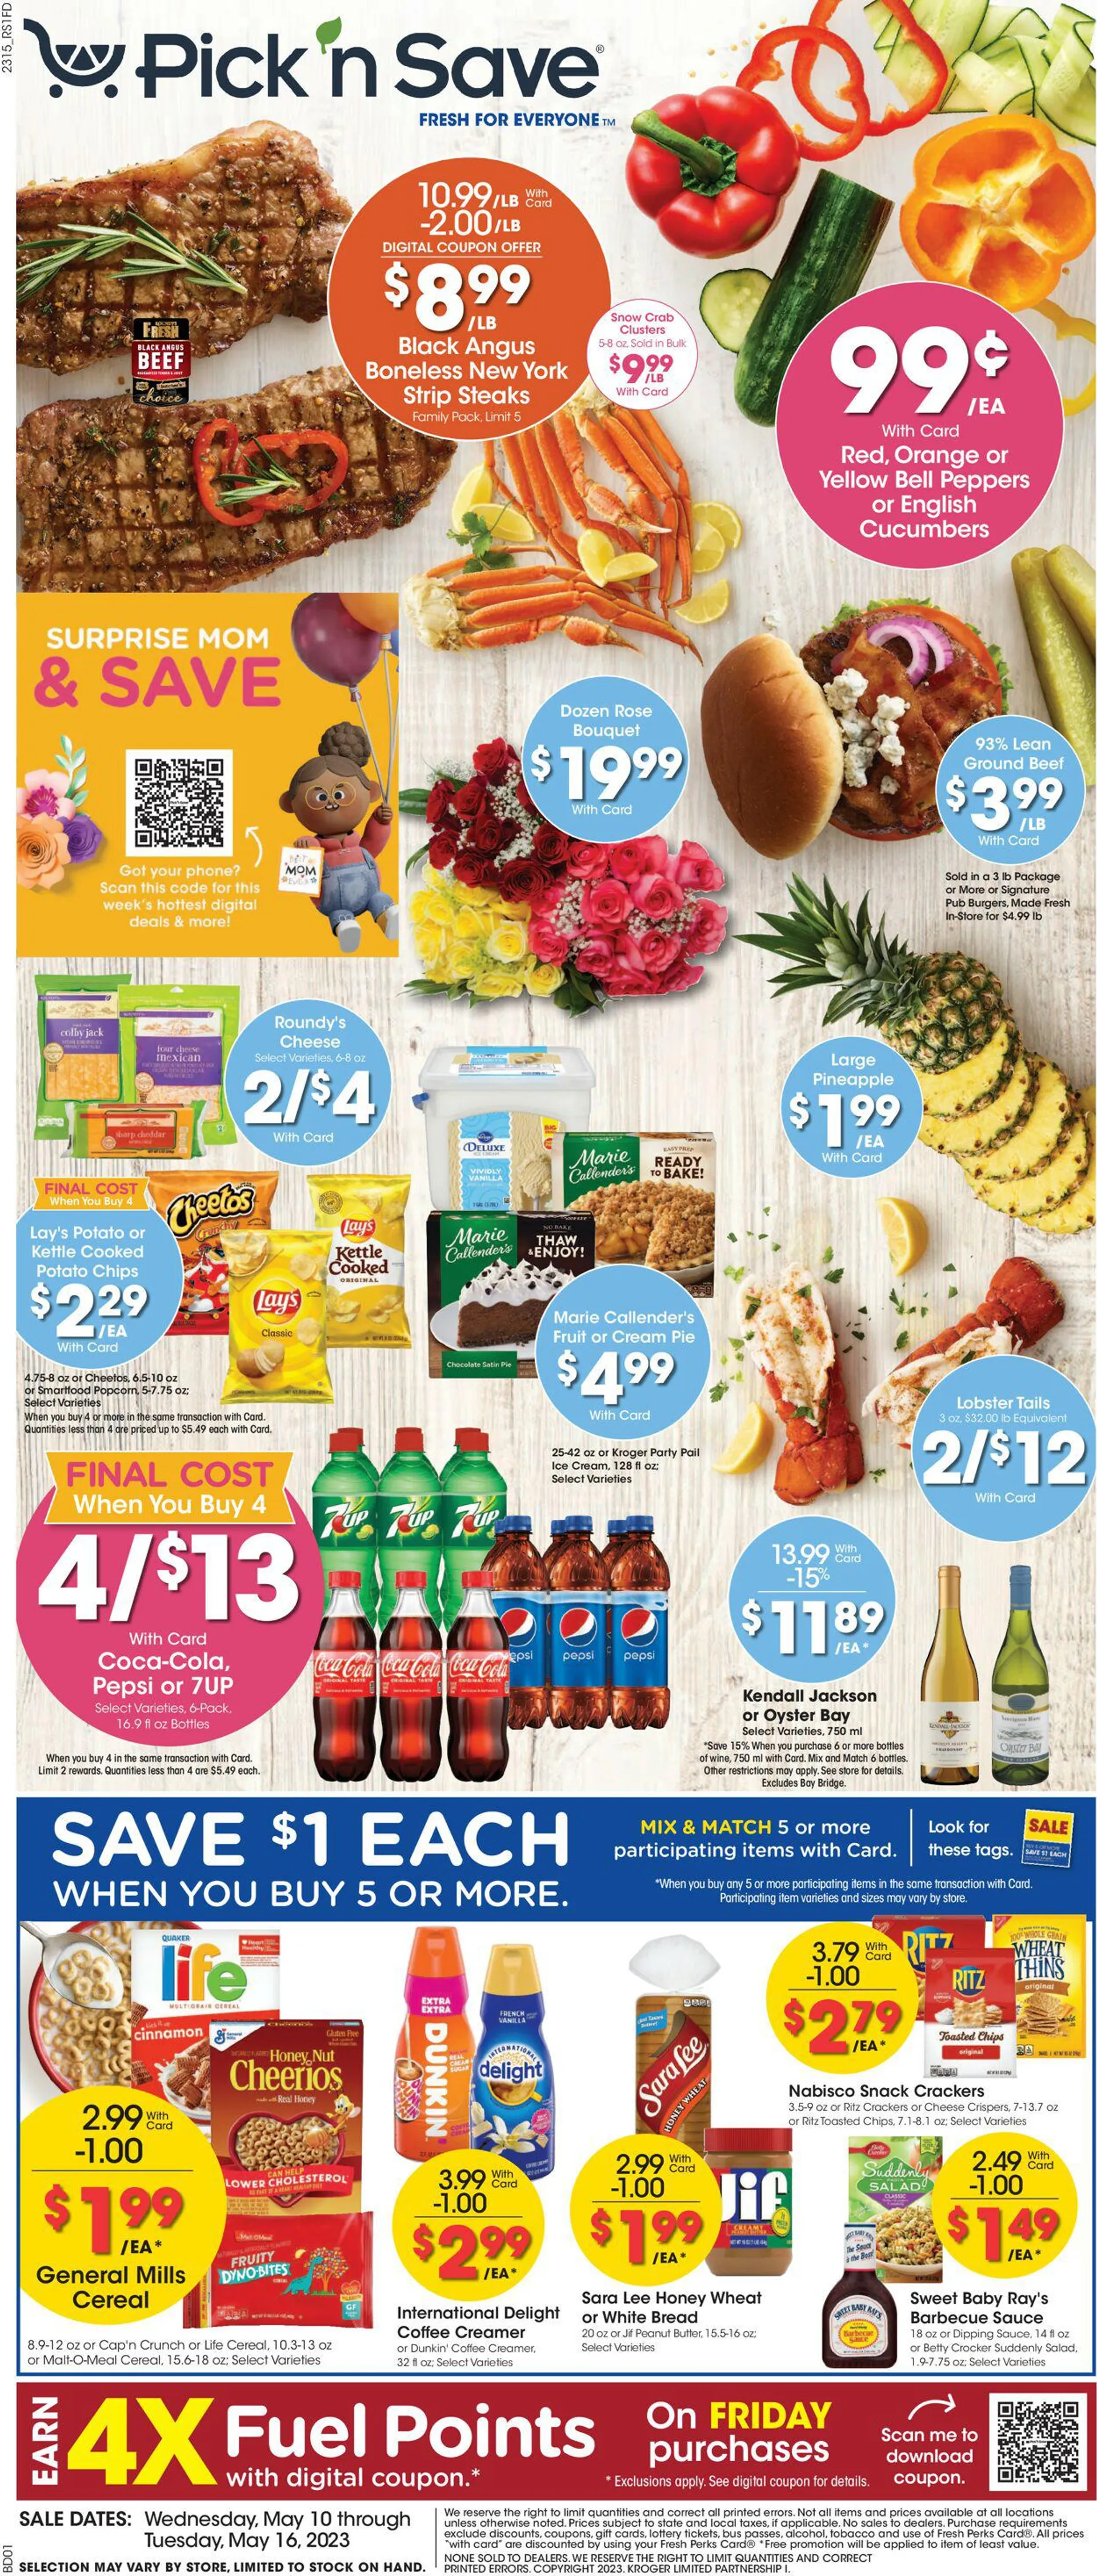 Pick ‘n Save Current weekly ad - 1